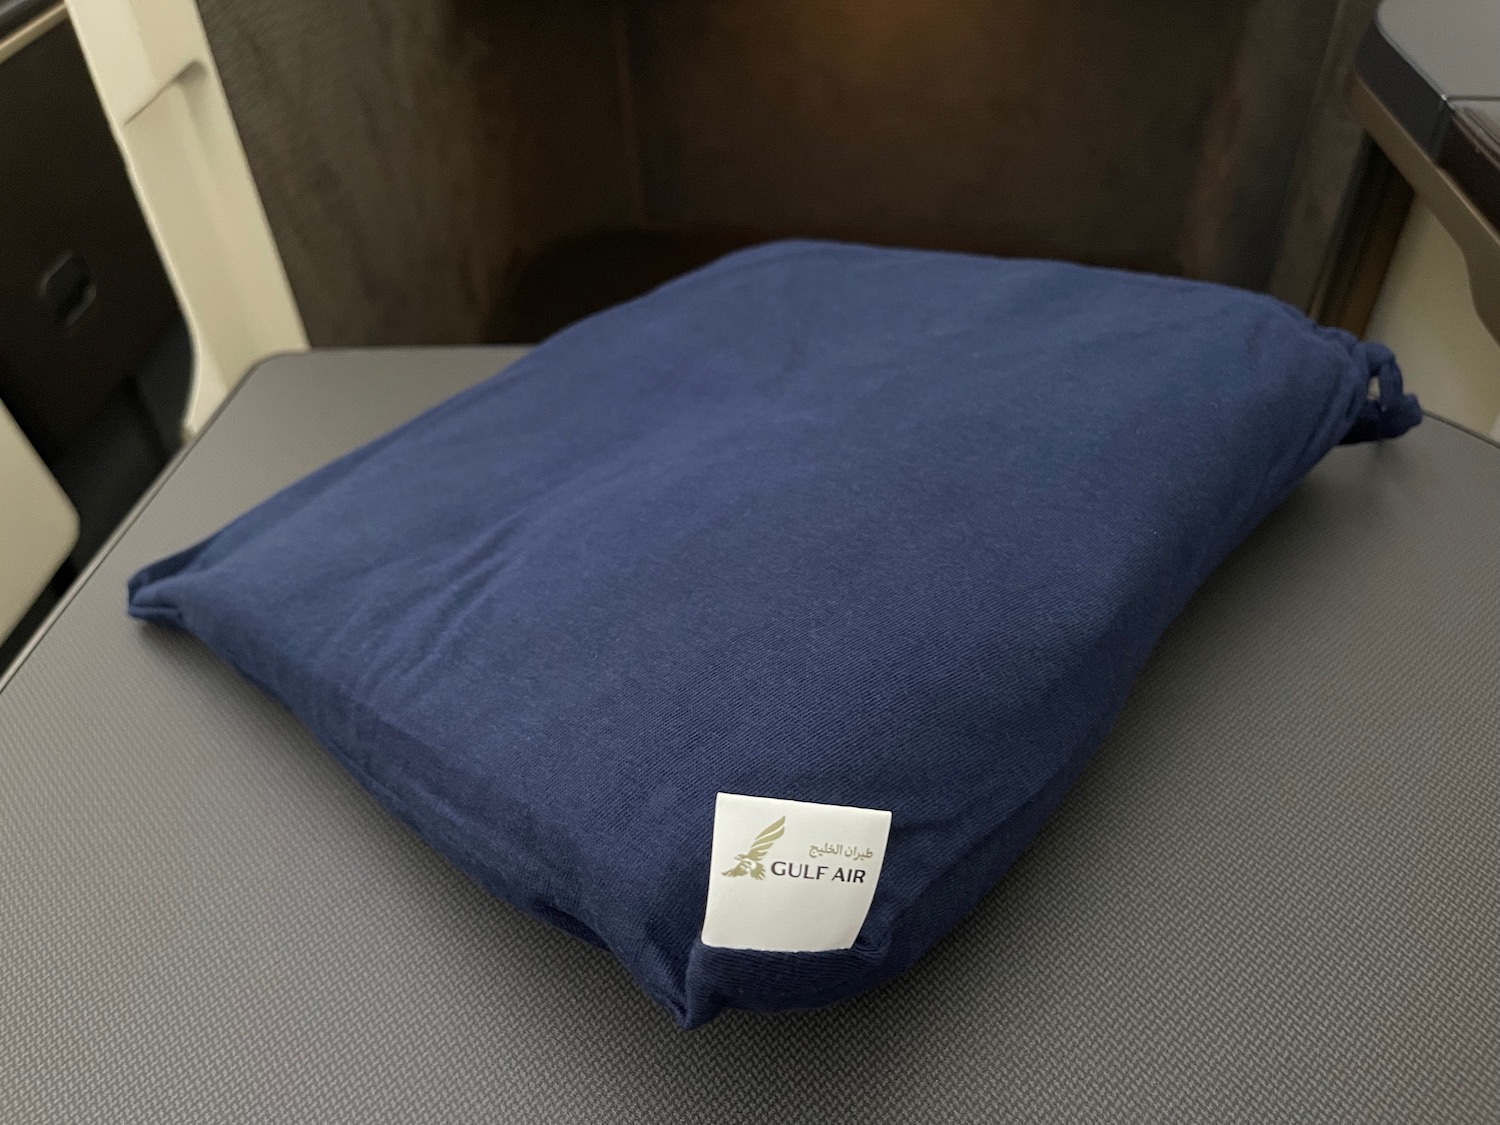 a blue pillow with a white label on it